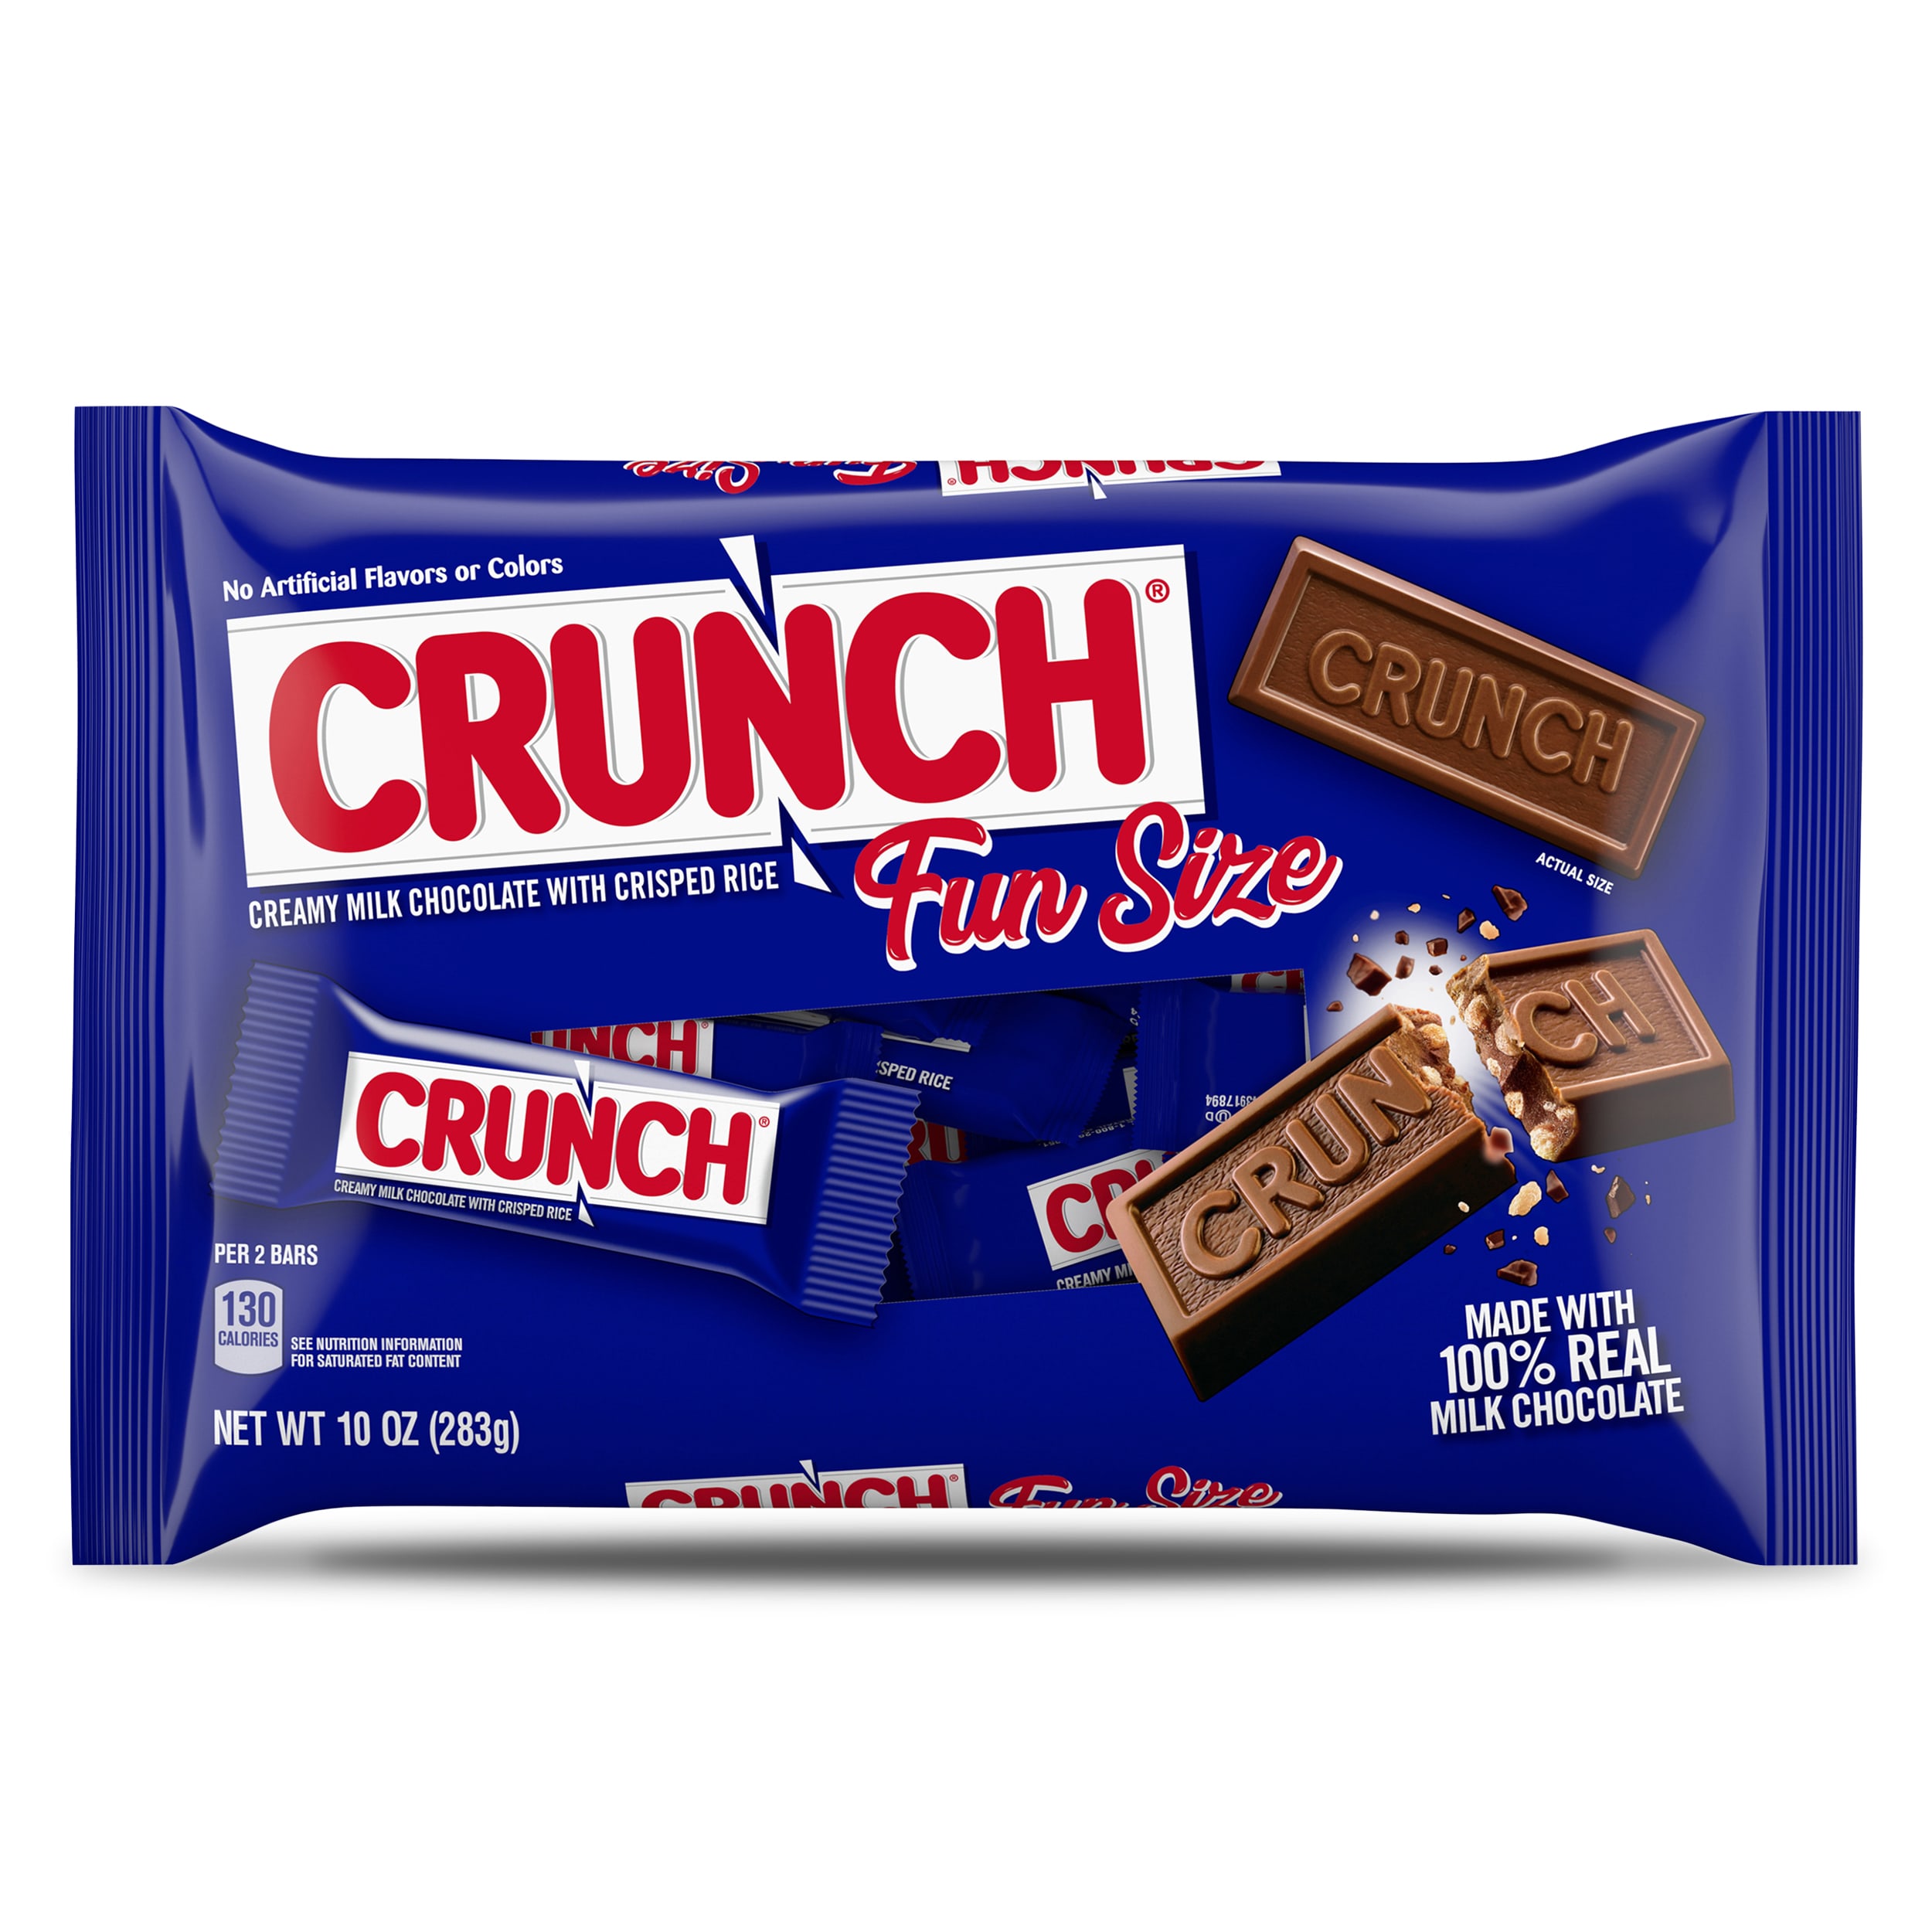 CRUNCH, Milk Chocolate and Crisped Rice, Fun Size Candy Bars, 10 oz - image 1 of 11